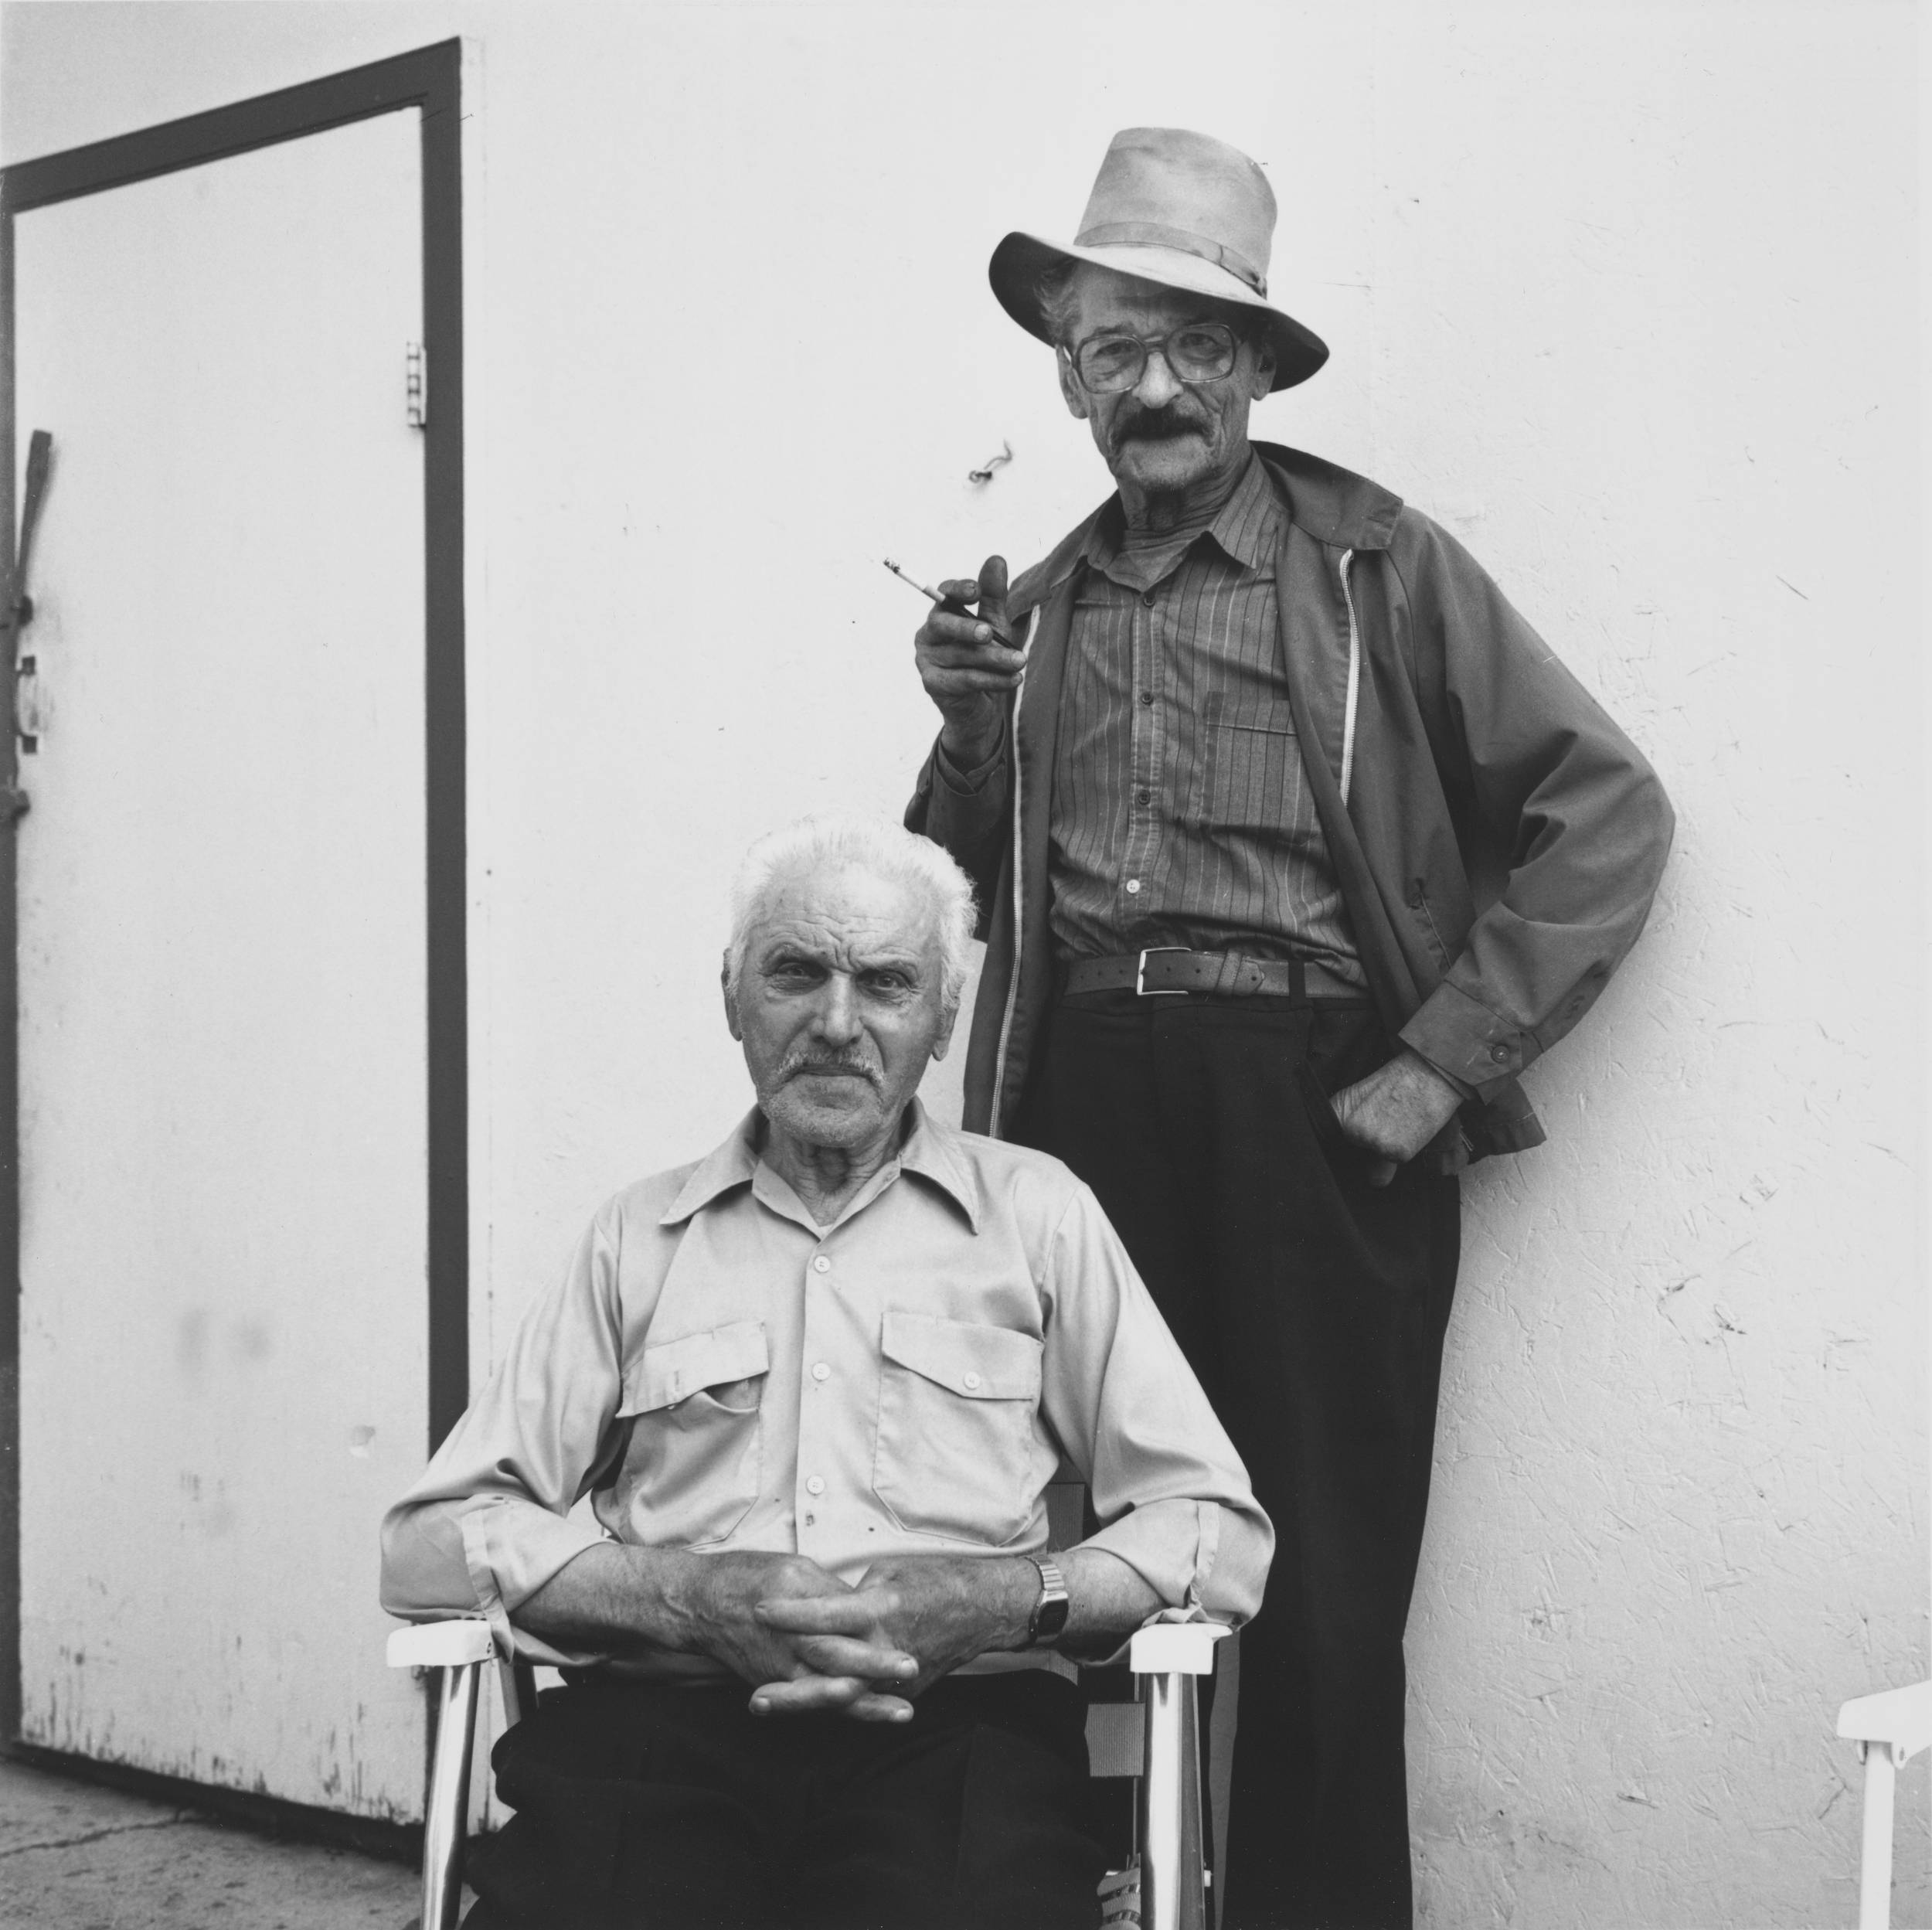 Black and white photo of two elderly men, one seated on lawn chair and other standing behind holding a cigarette in right hand.